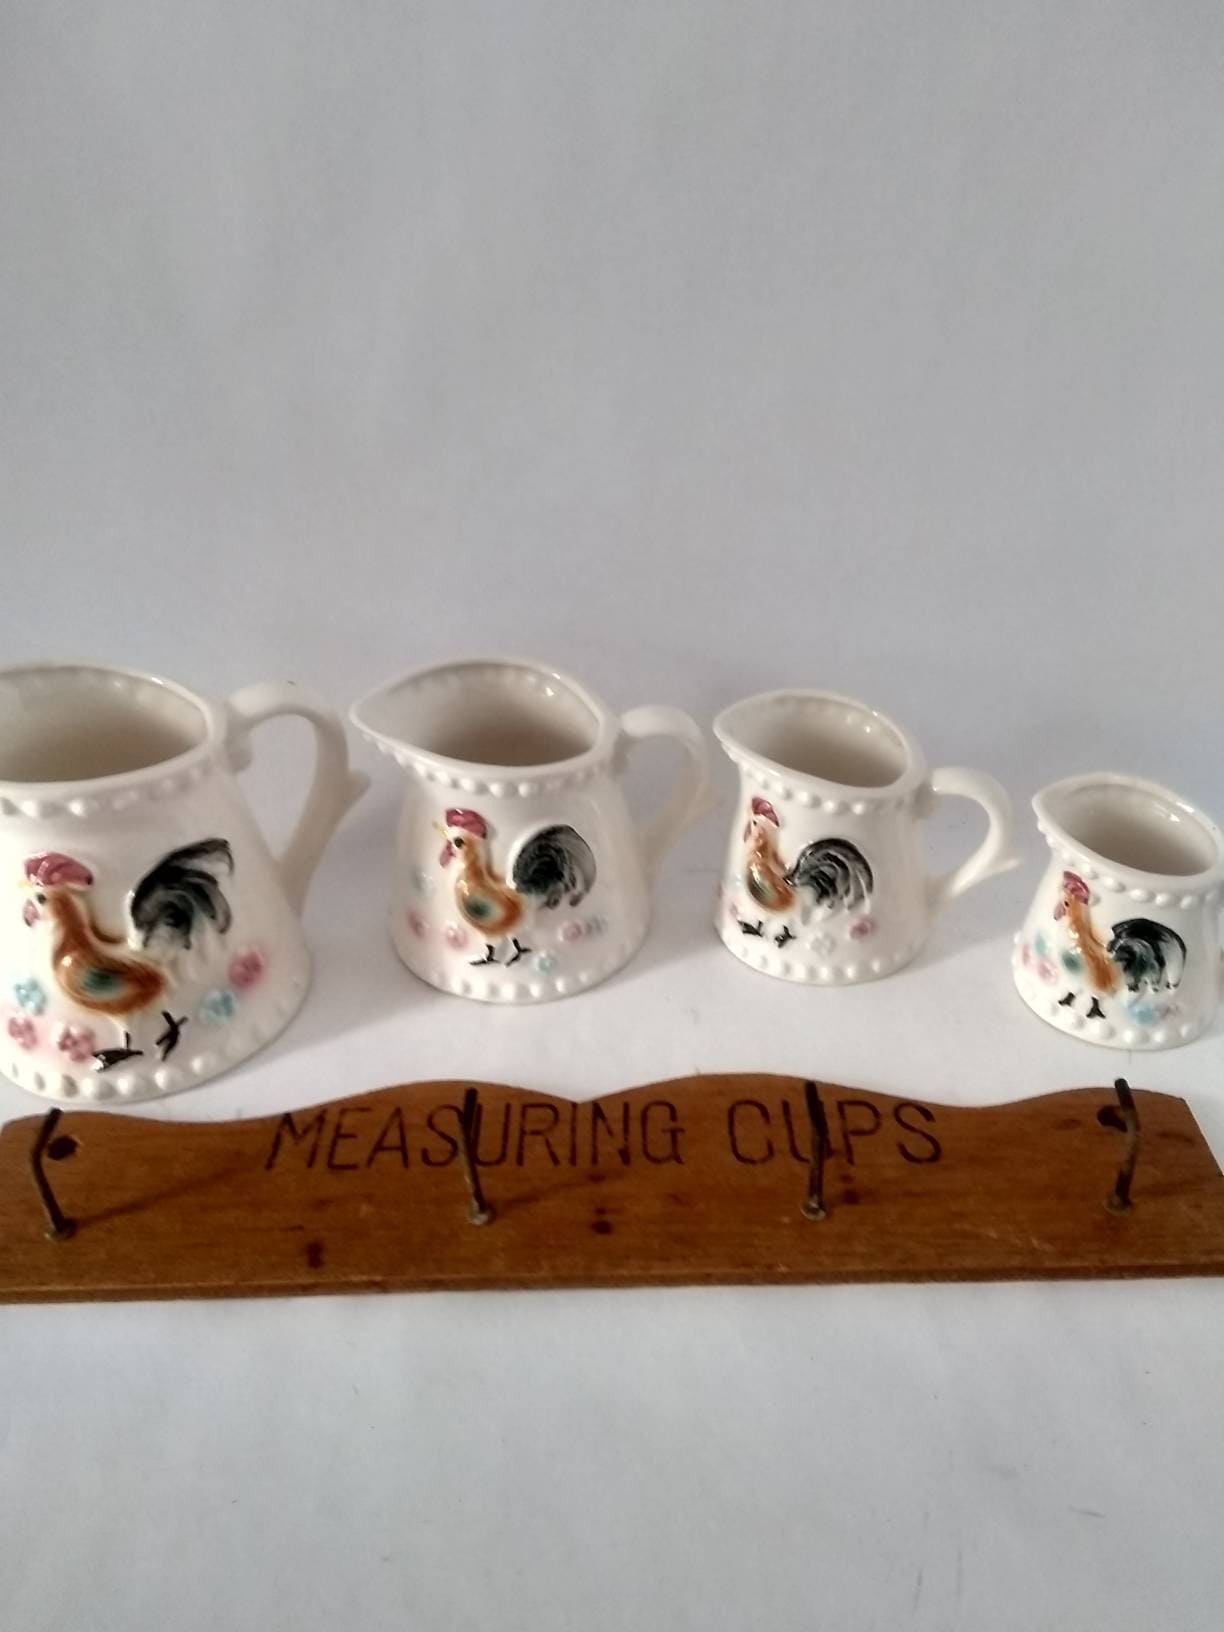 Ceramic chicken measuring cup with wooden handle - Measuring Cups & Spoons, Facebook Marketplace